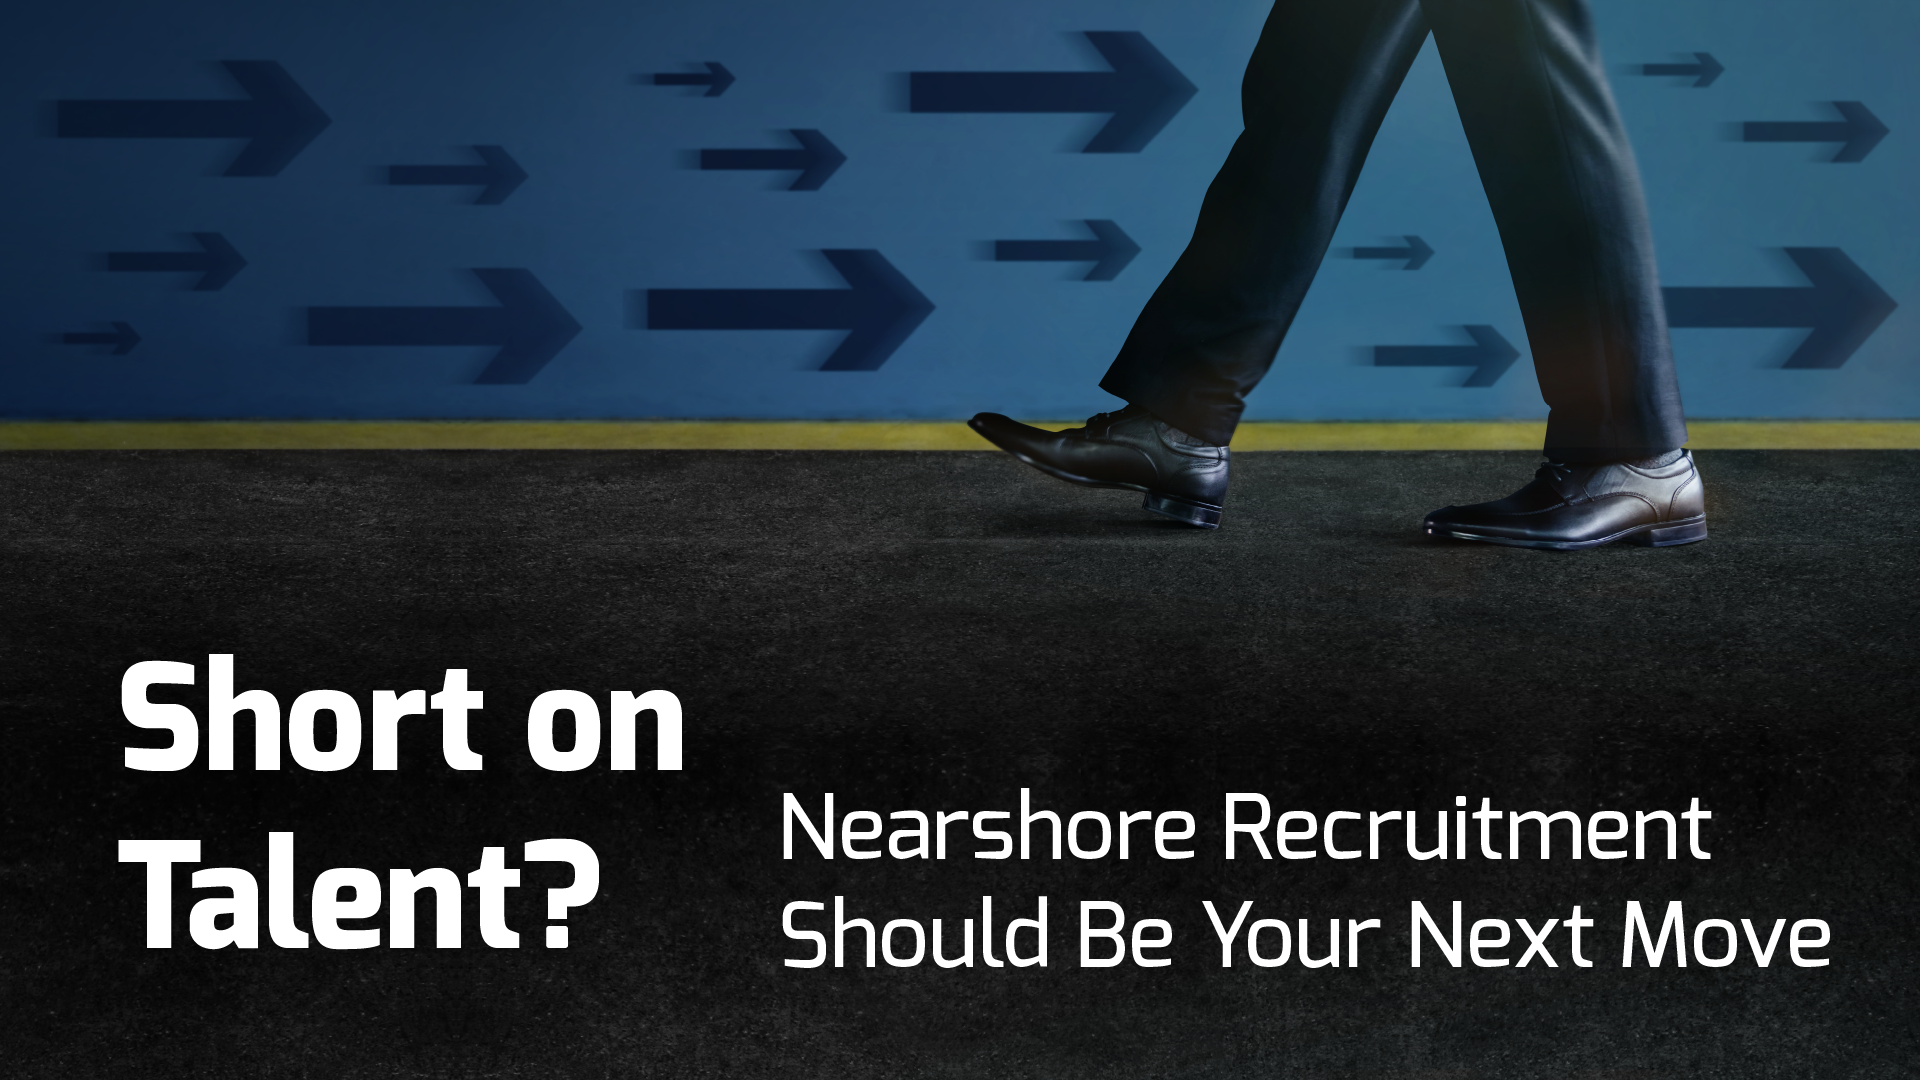 Short on Talent? Nearshore Recruitment Should Be Your Next Move